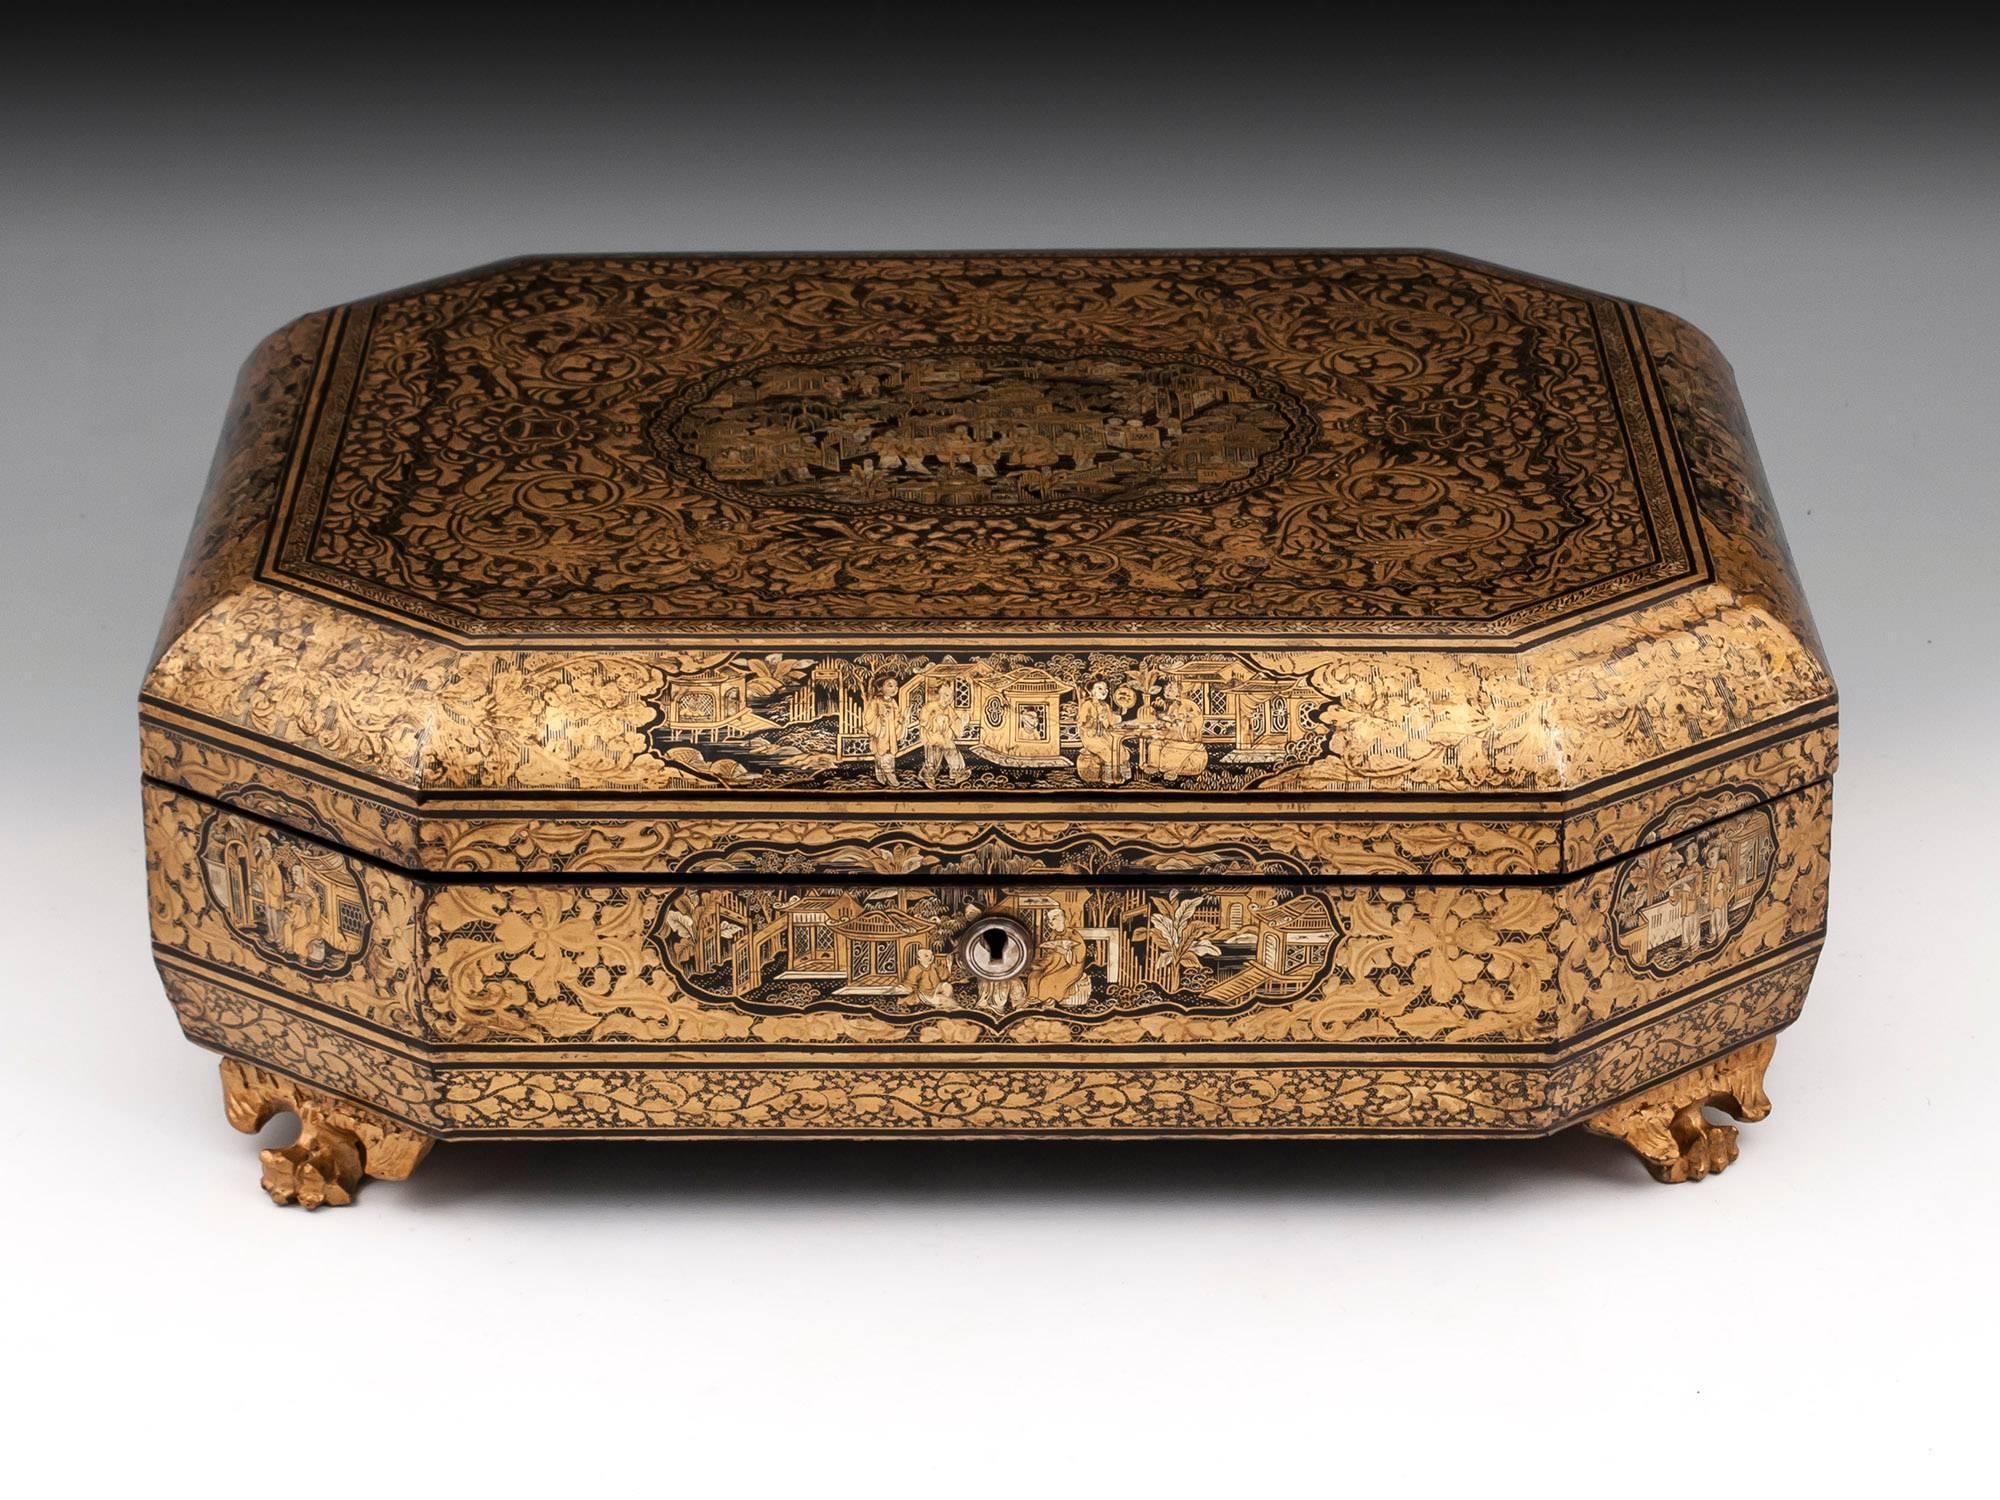 Chinese Export lacquer box, octagonal in shape with rolled top, hinged lid, standing on four winged dragon claw feet. The box is extensively decorated in gilt with black lacquer: with various scenes of small Chinese figures in pavilion gardens, the